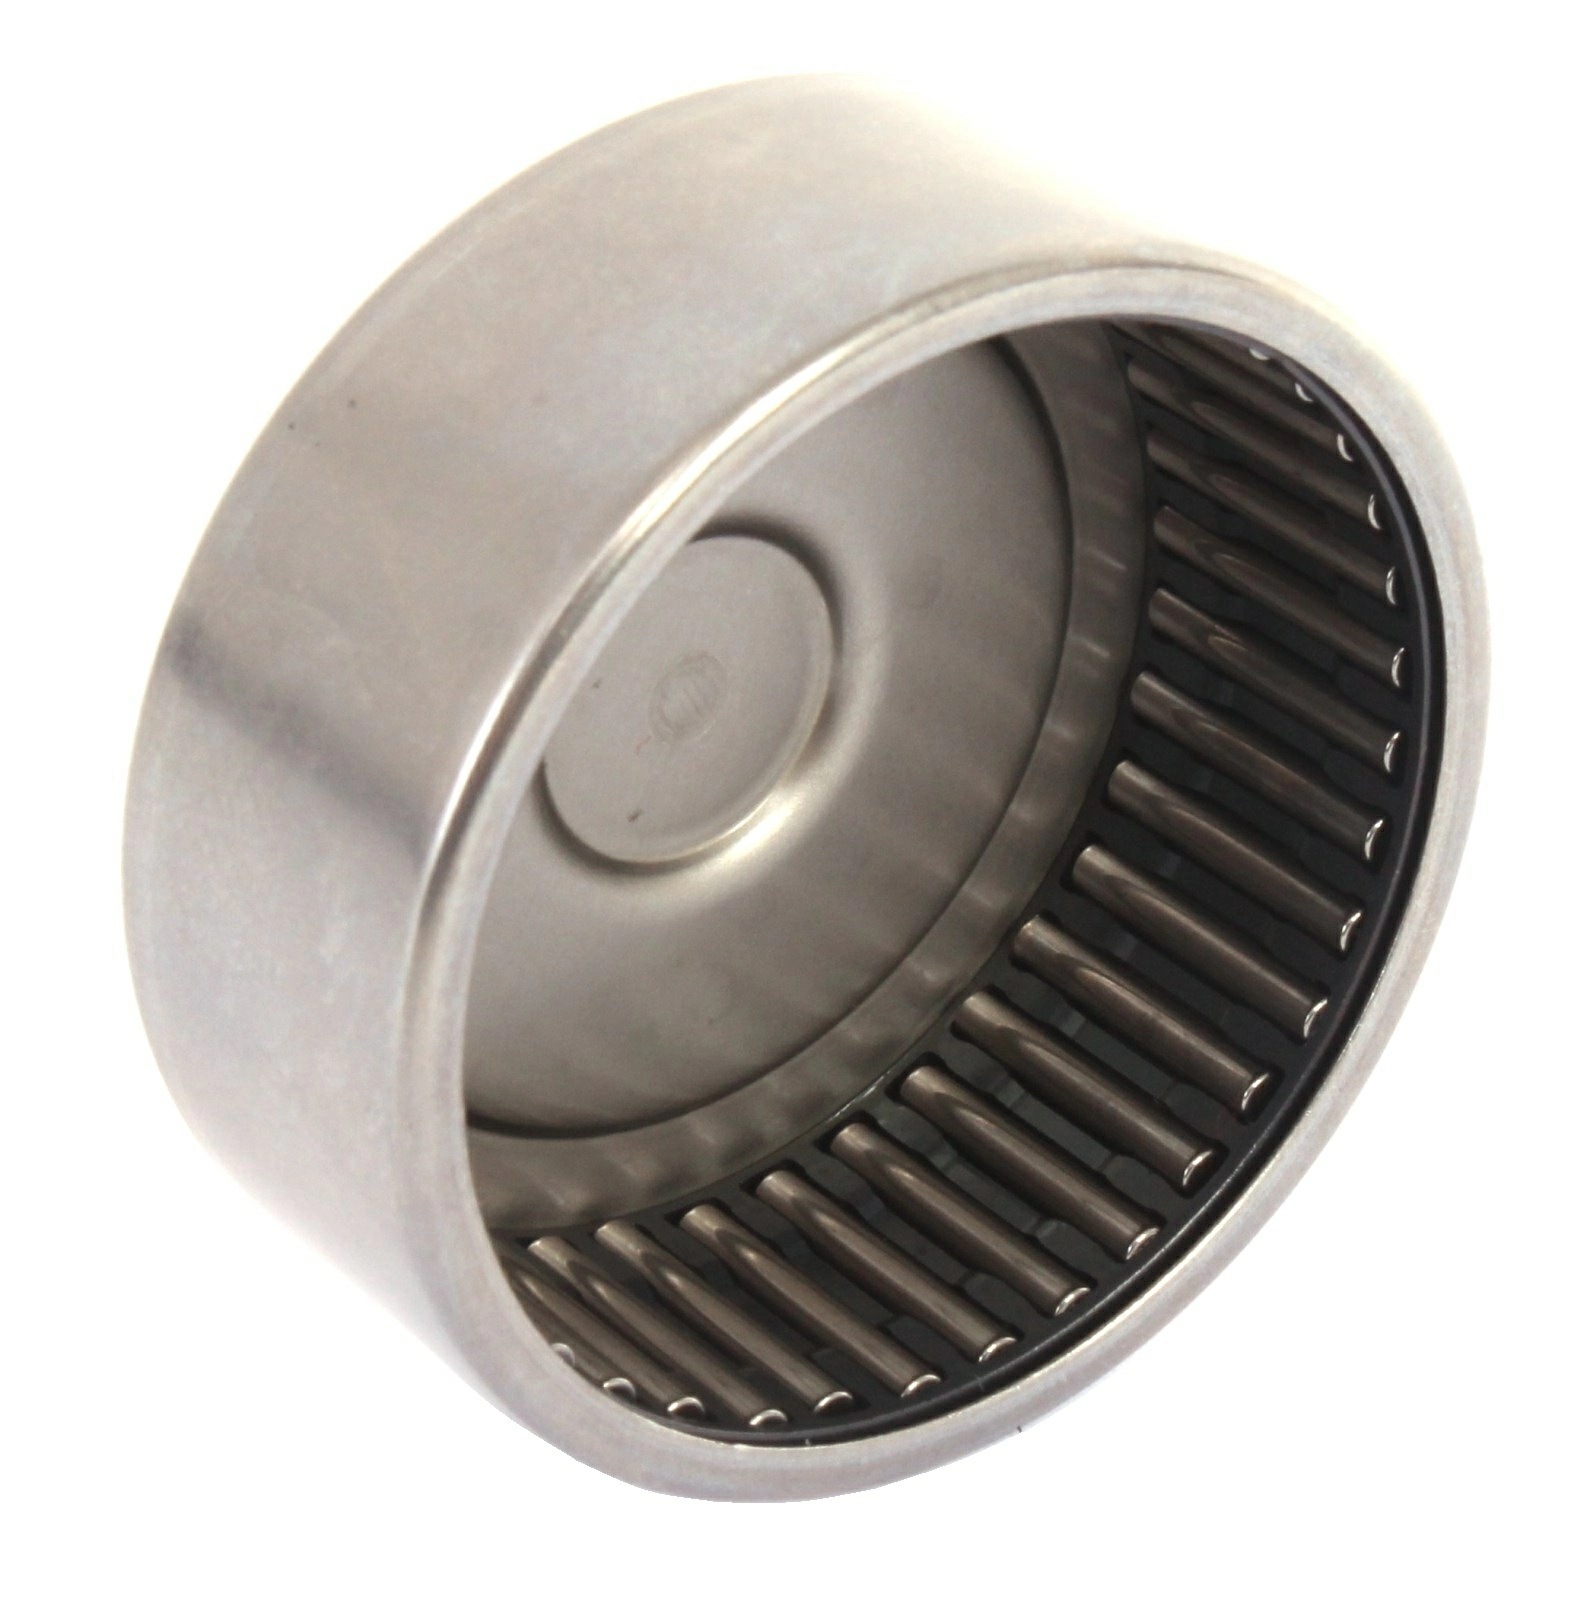 Drawn Cup Needle Roller Bearings (Closed End)